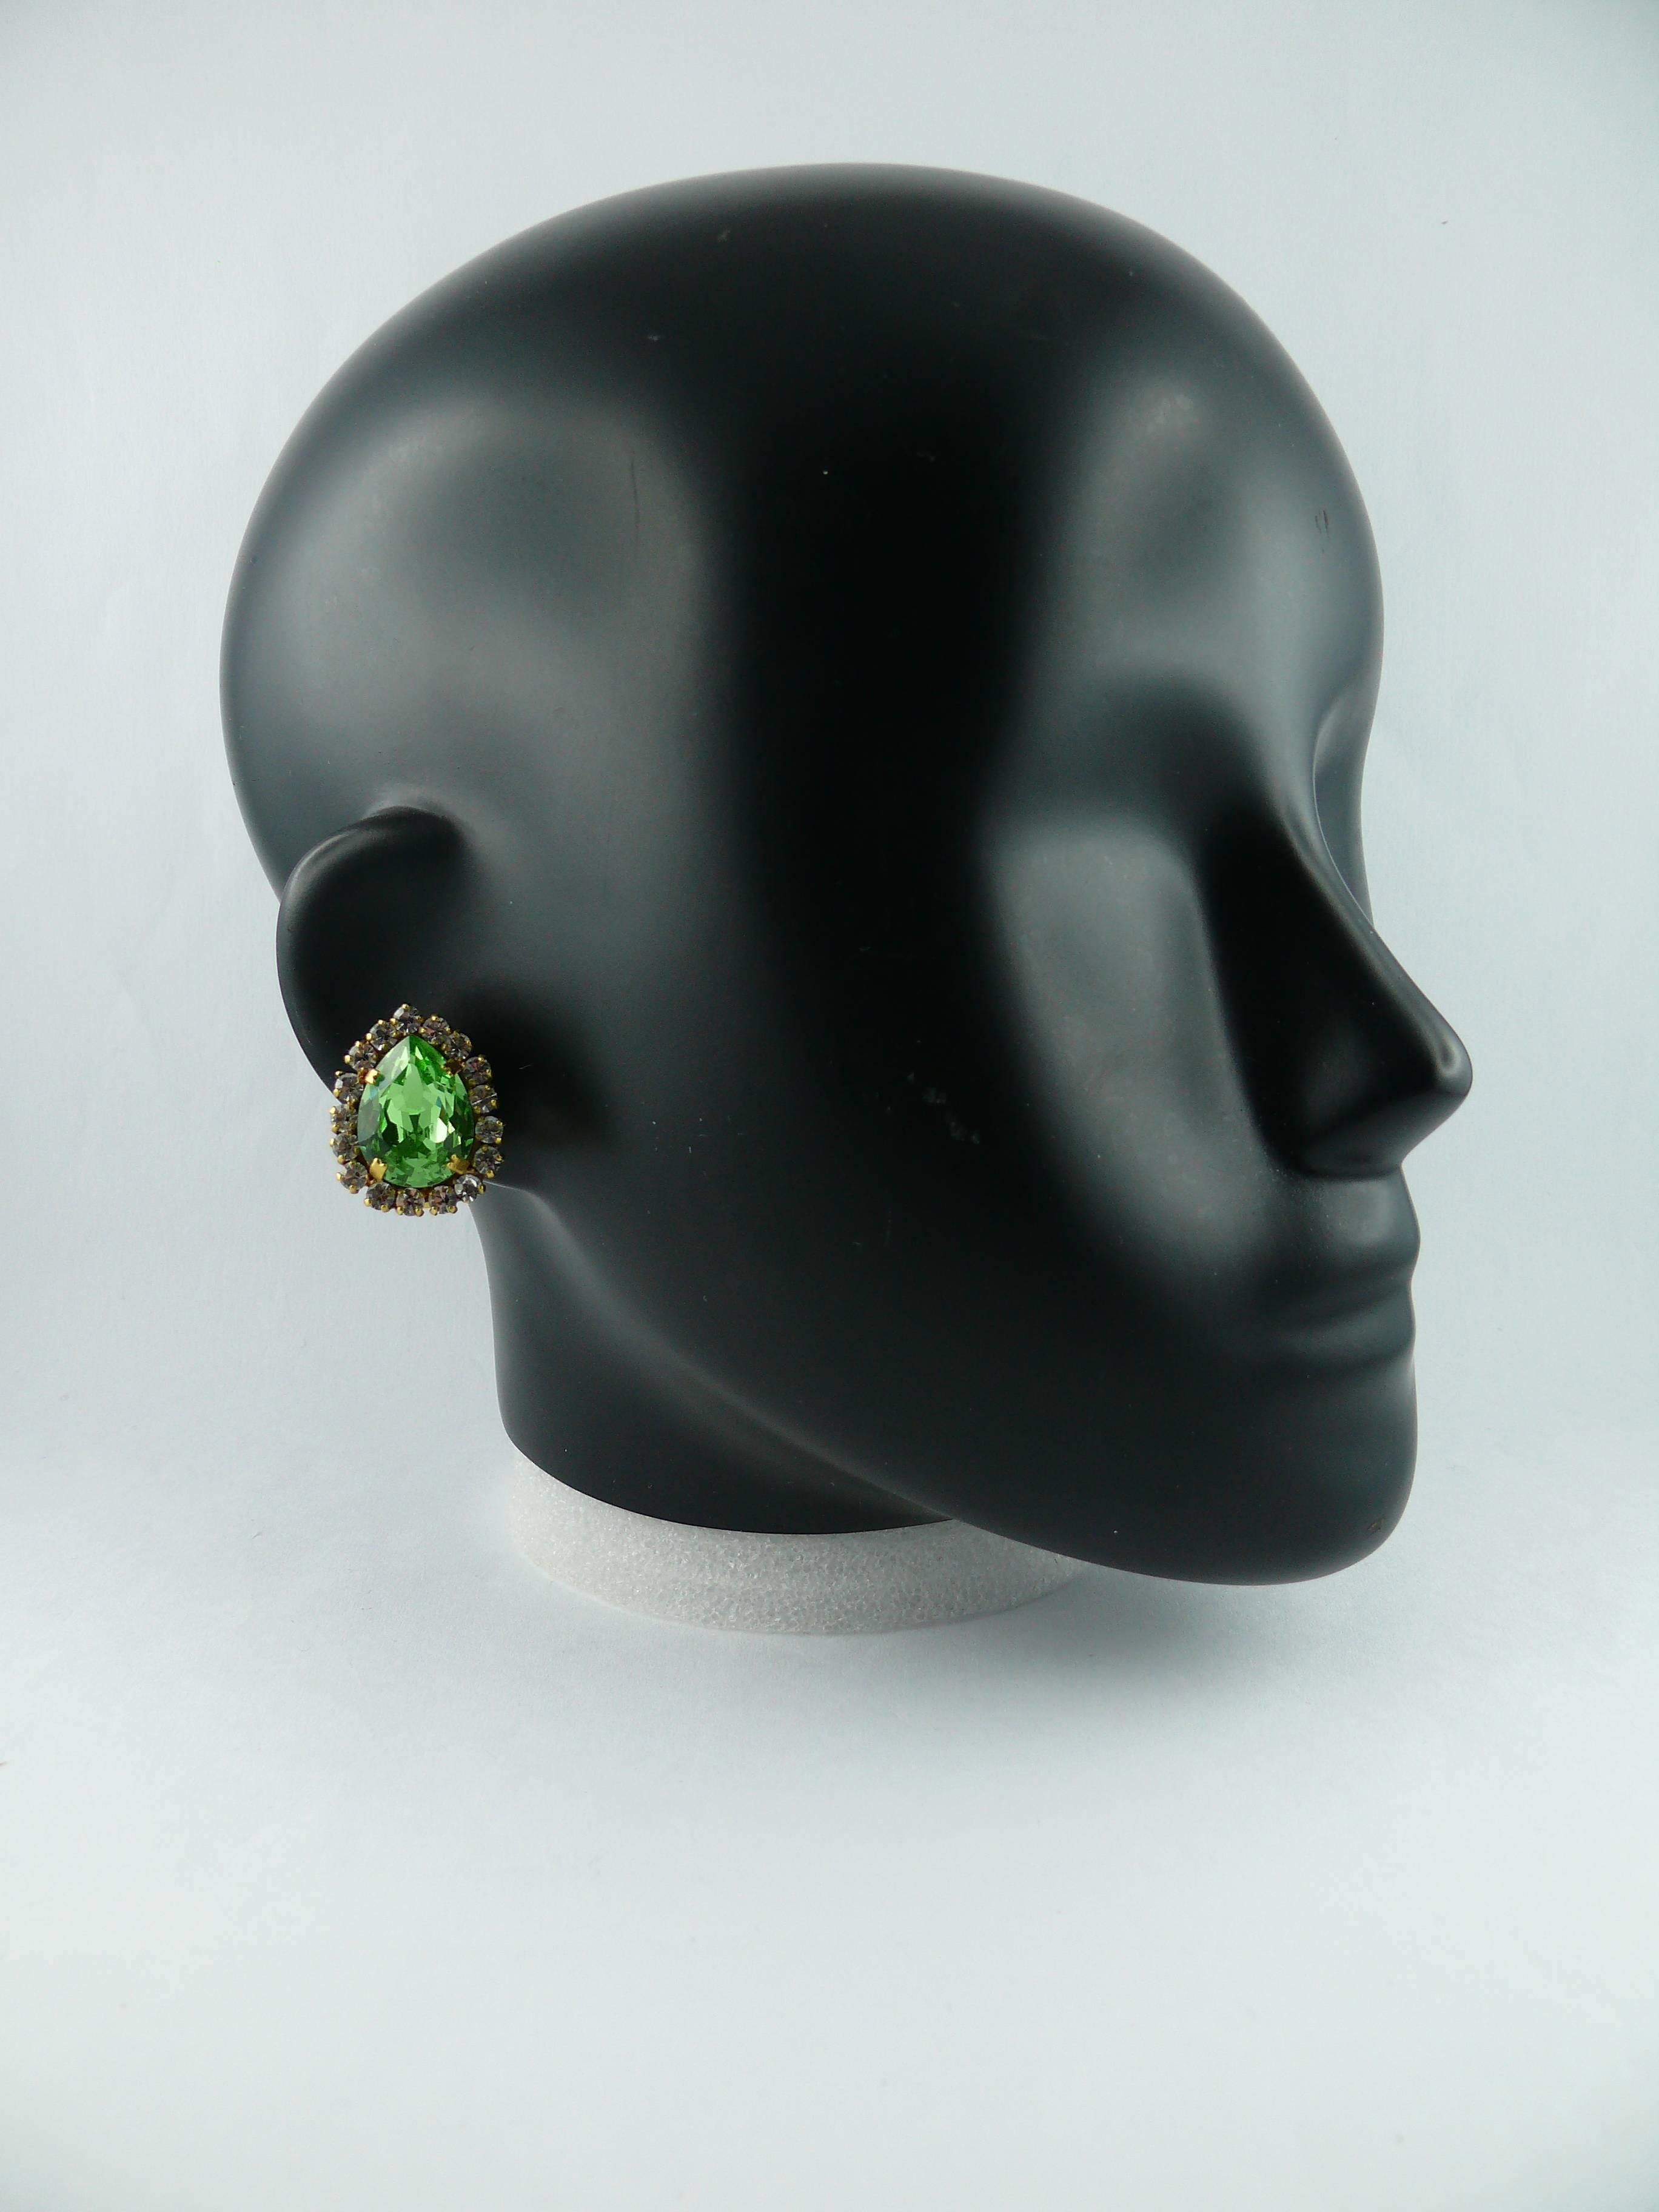 CHANEL vintage faux diamond and emerald clip-on earrings set with Swarovski crystals.

Spring/Summer 1995 Collection.

Marked CHANEL 95 P Made in France.

JEWELRY CONDITION CHART
- New or never worn : item is in pristine condition with no noticeable